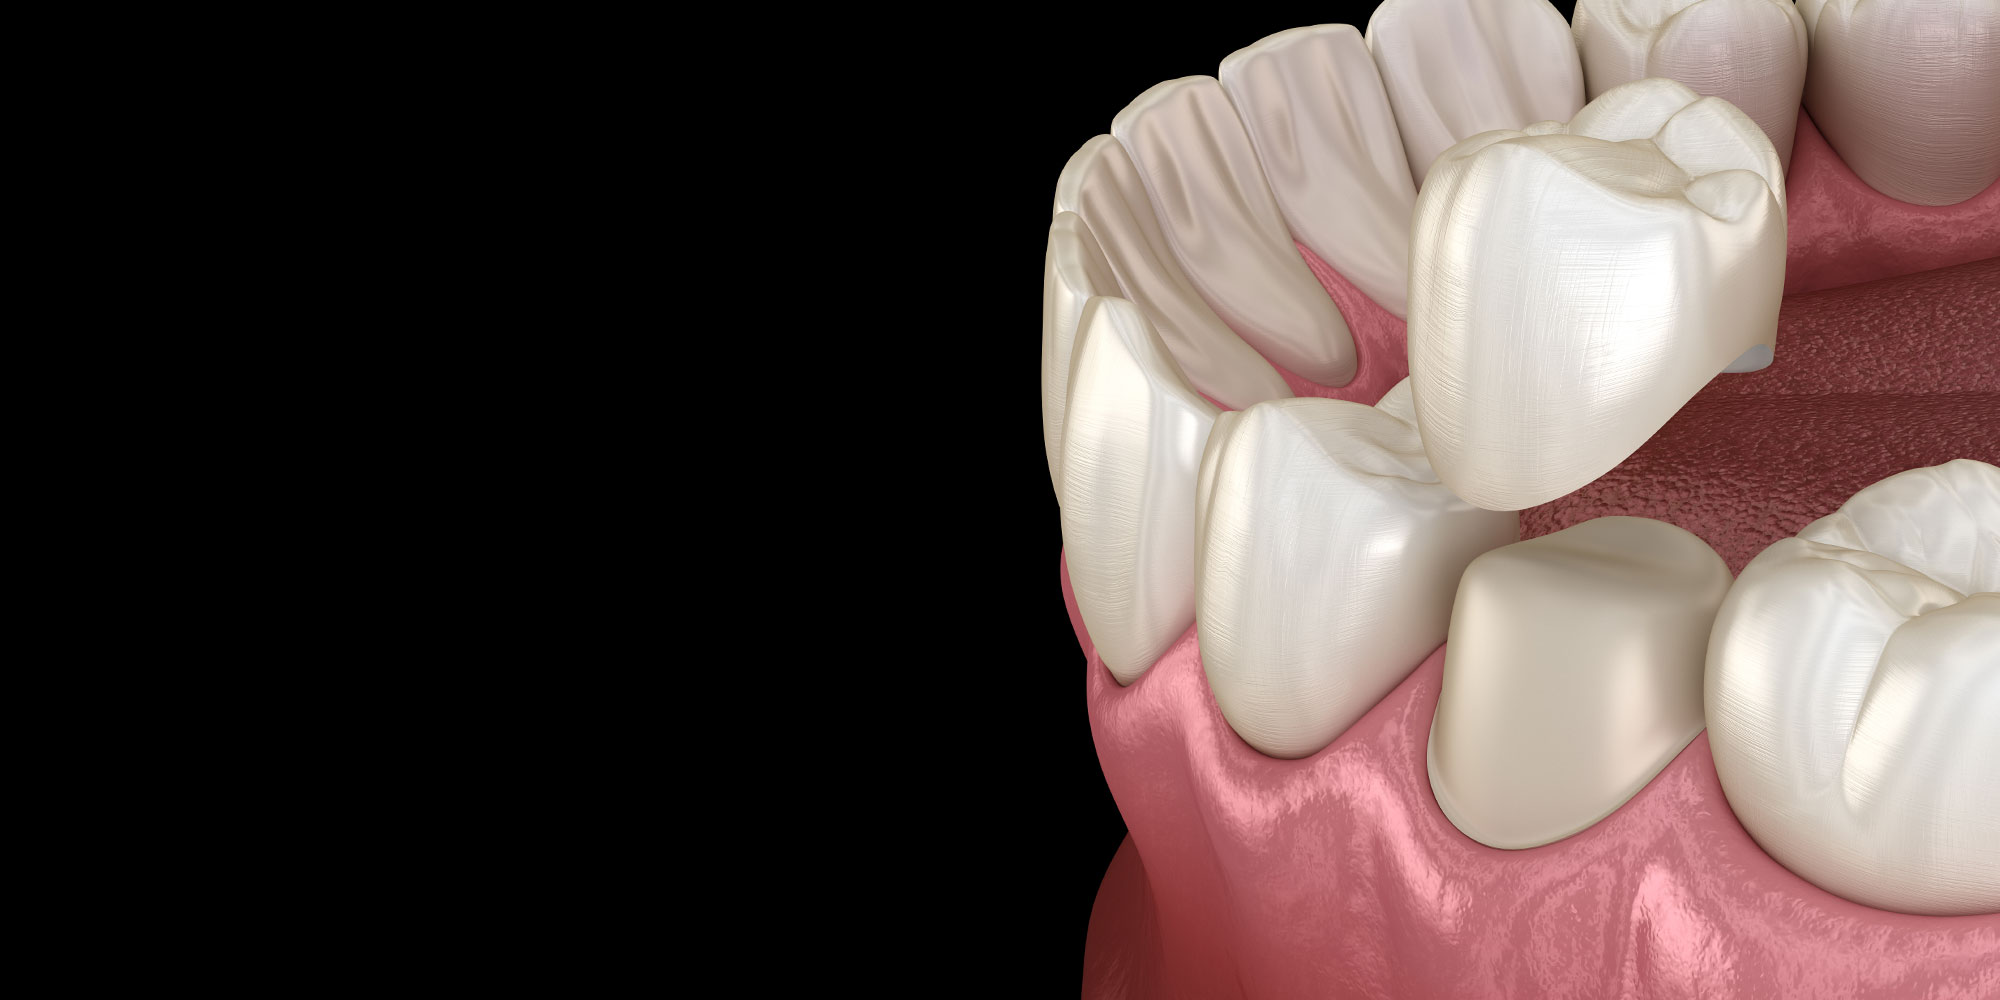 Don’t Know What The Differences Are Between Tooth Crowns And Dental Bridges In Fairfax, VA? We Can Tell You What They Are